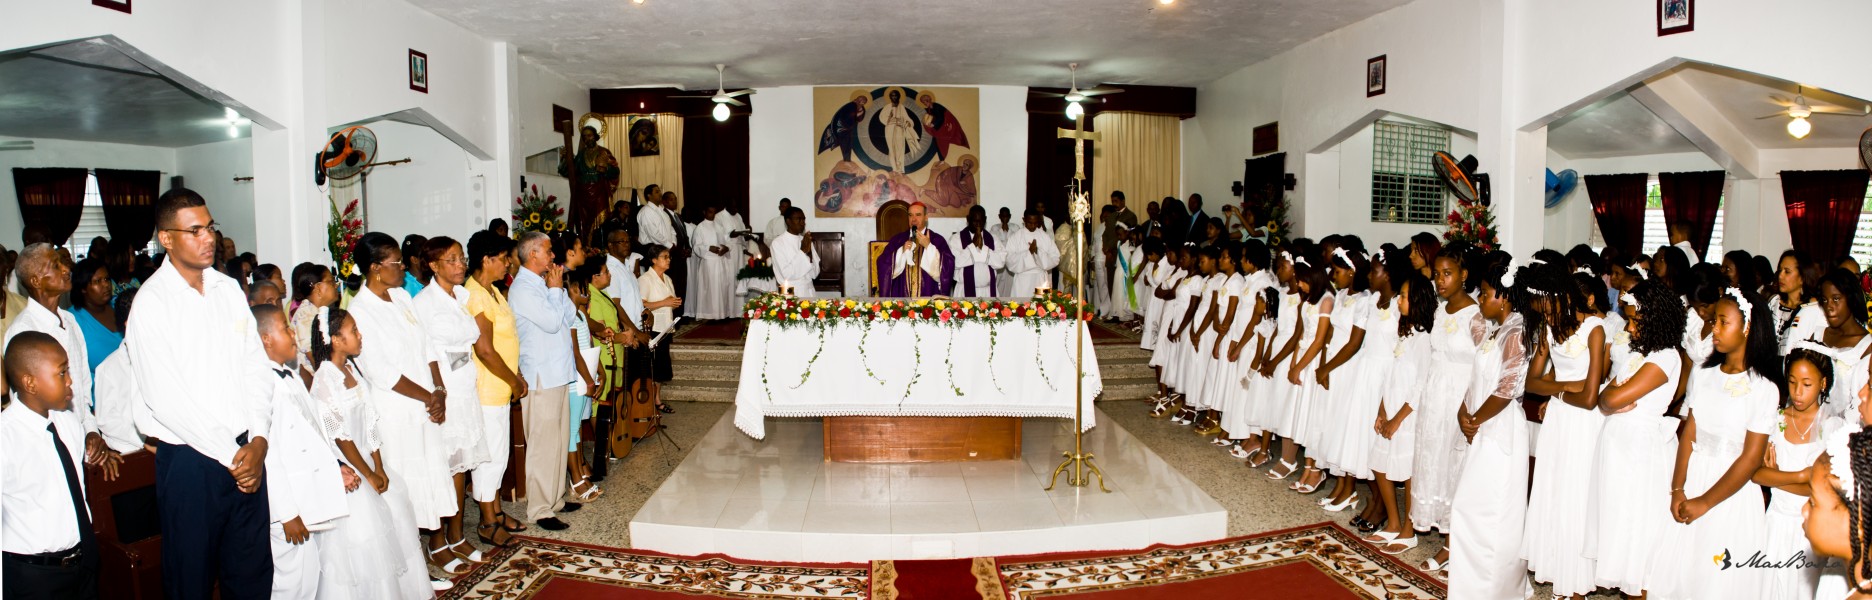 Afro-Dominicans in church